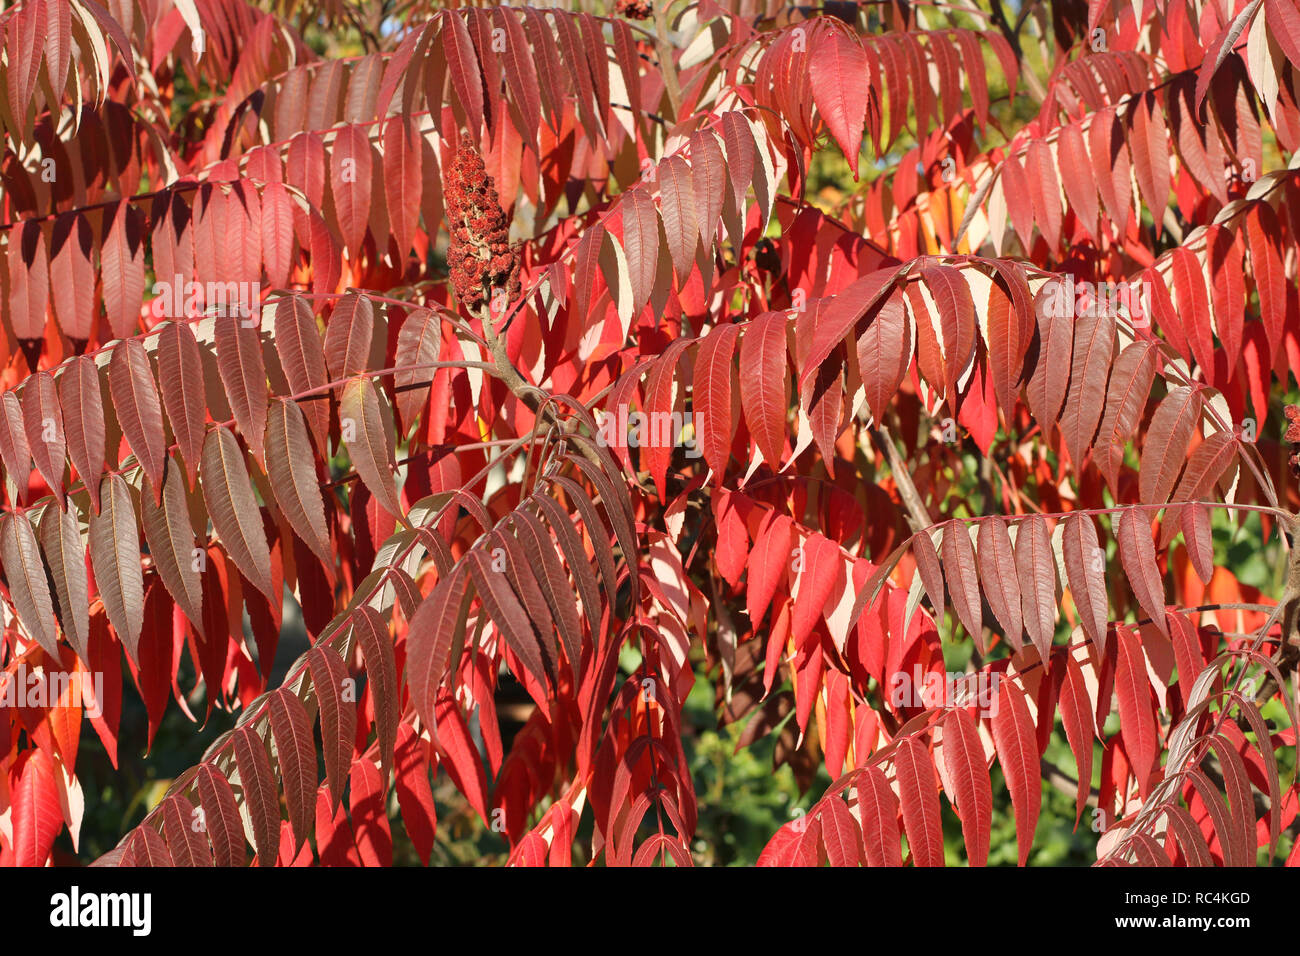 Autumn - purple and red leaves on sumac tree against green trees Stock Photo